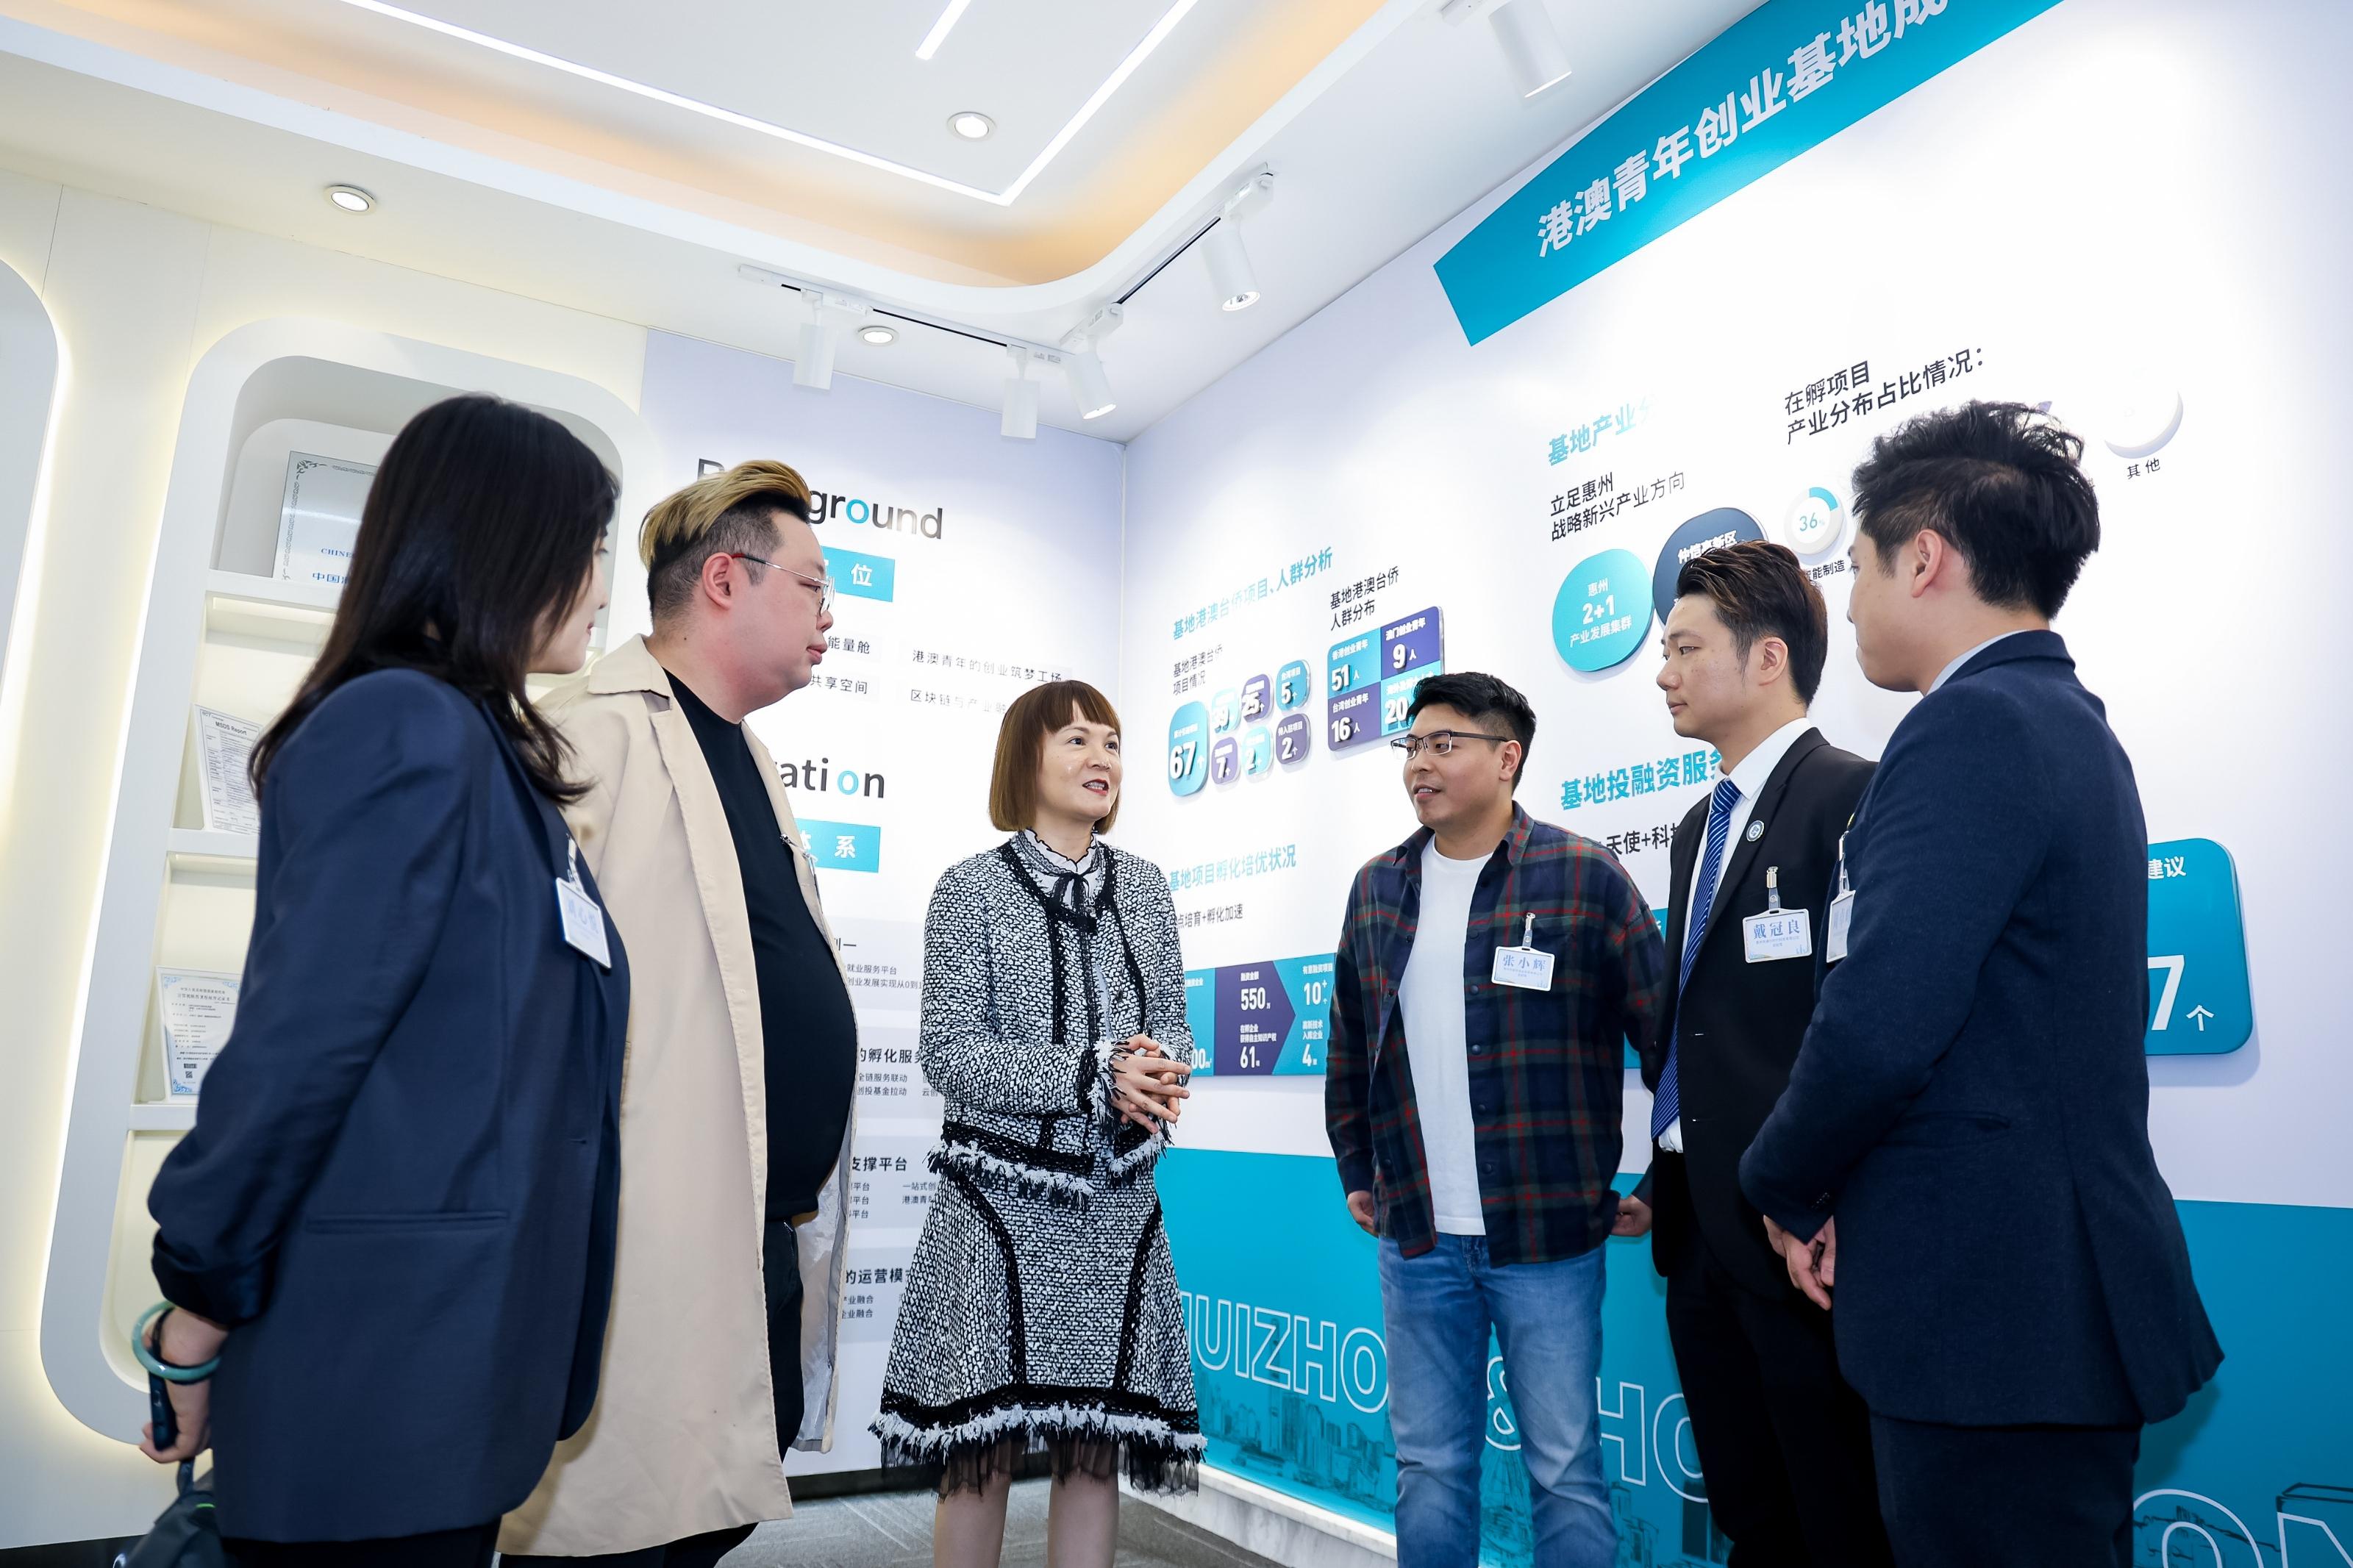 The Commissioner for the Development of the Guangdong-Hong Kong-Macao Greater Bay Area, Ms Maisie Chan (third left), visits the Huizhou Zhongkai Hong Kong-Macao Youth Entrepreneurship Base today (October 17) to learn about the operation of the Entrepreneurship Base and exchange views with Hong Kong young entrepreneurs who started their businesses in Huizhou.